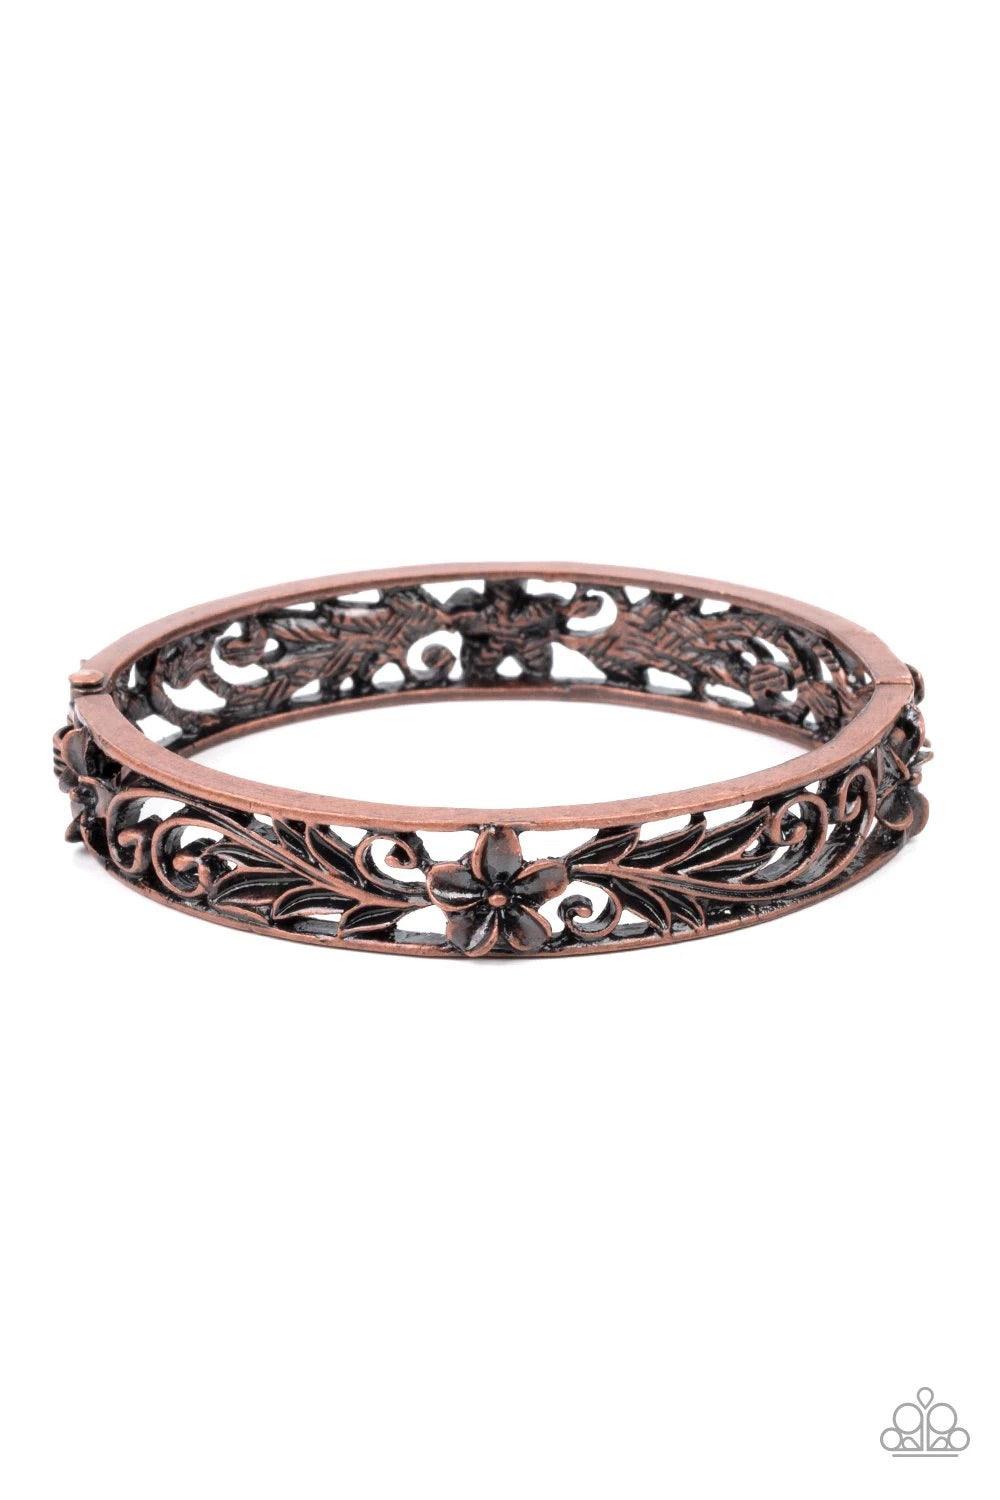 Paparazzi Accessories Hawaiian Essence - Copper Filled with leafy tropical floral filigree, two antiqued copper frames connect into a whimsical bangle-like cuff around the wrist. Features a hinged closure.Sold as one individual bracelet. Jewelry